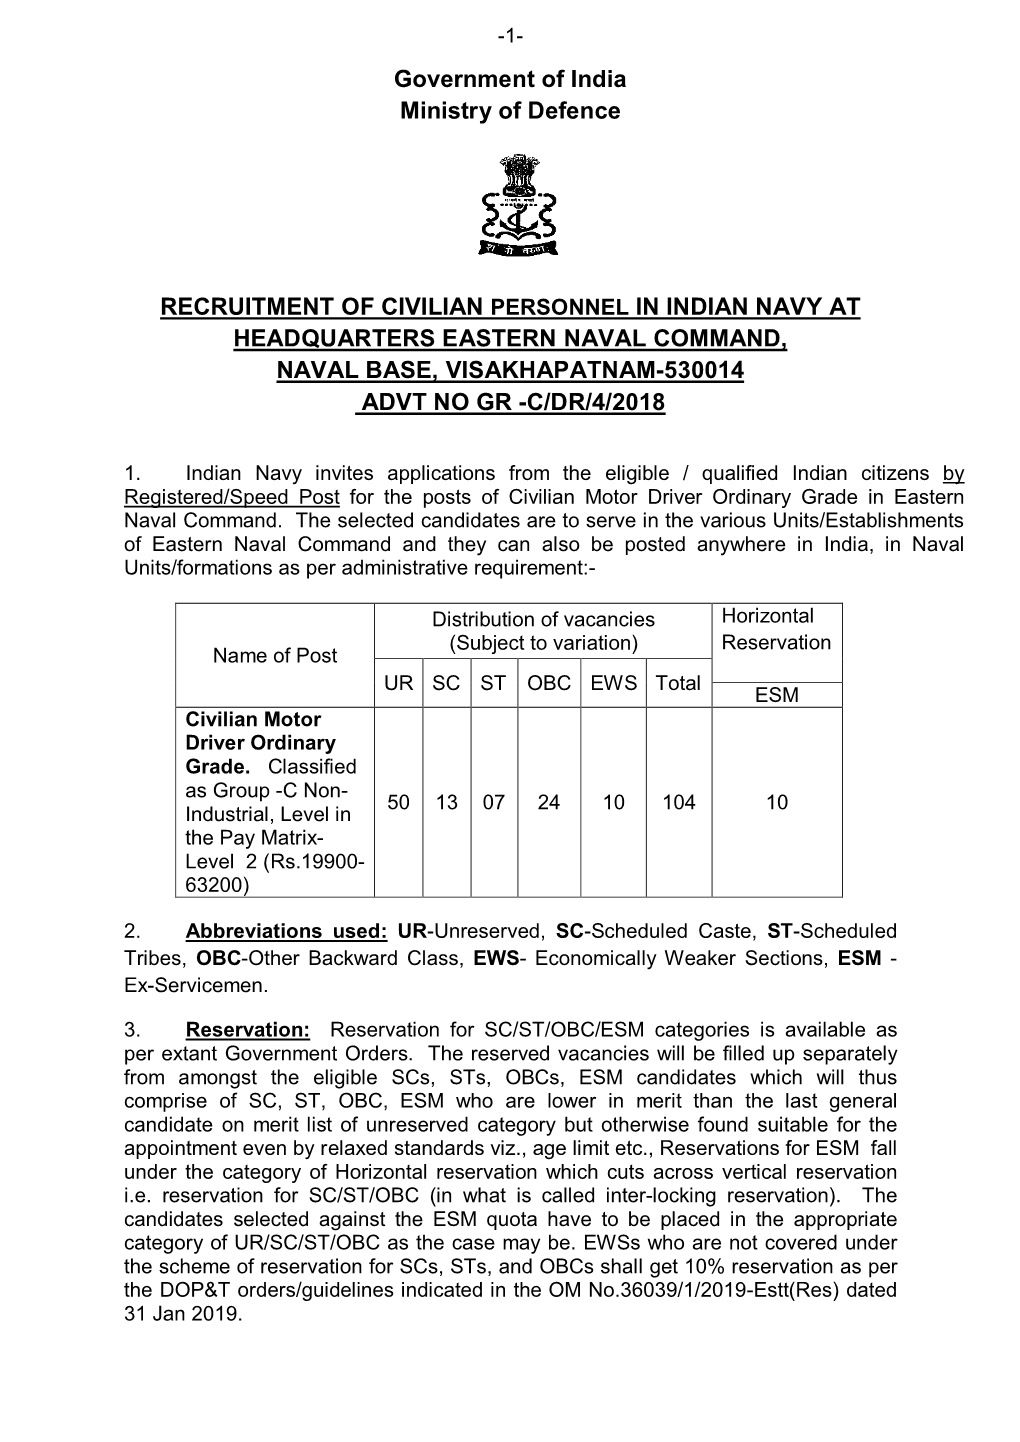 Government of India Ministry of Defence RECRUITMENT of CIVILIAN PERSONNEL in INDIAN NAVY at HEADQUARTERS EASTERN NAVAL COMMAND